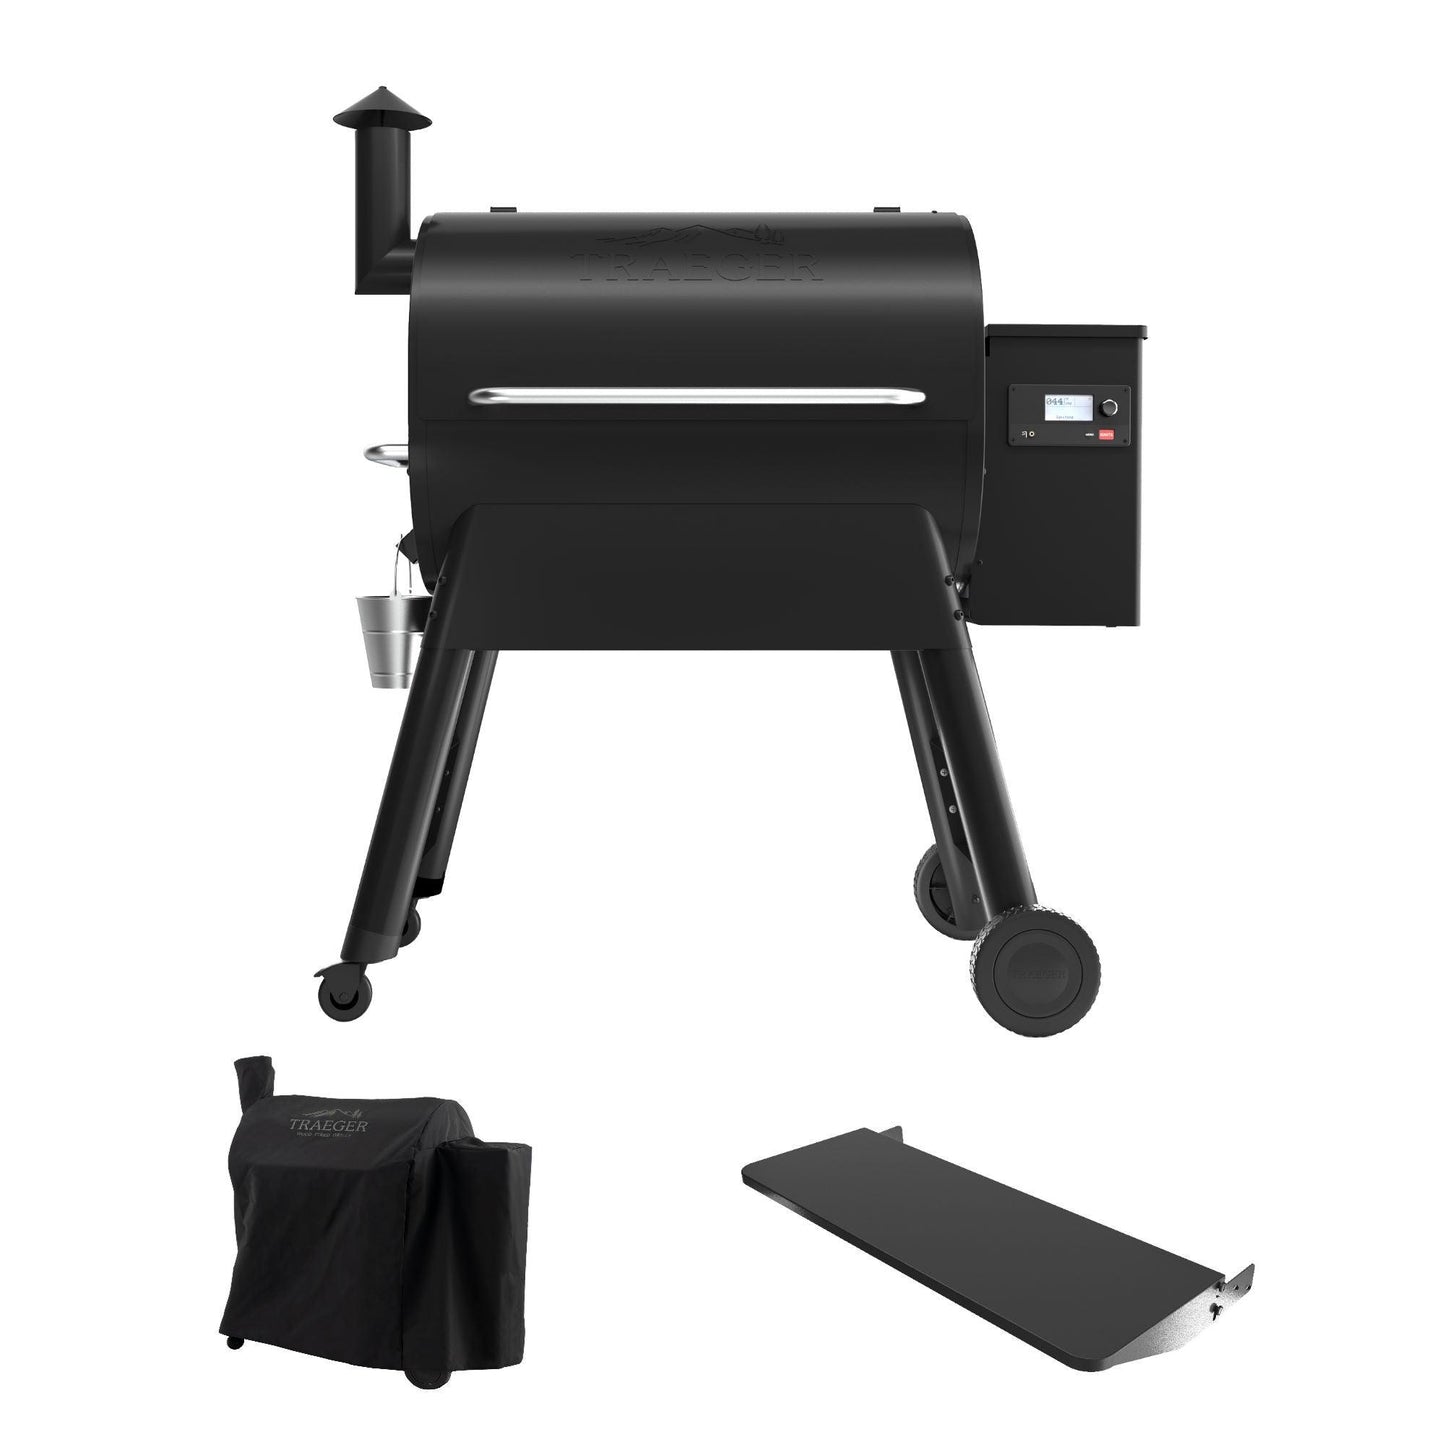 Traeger Pro 780 Pellet BBQ Grill with Cover and Front Shelf - BBQ Land